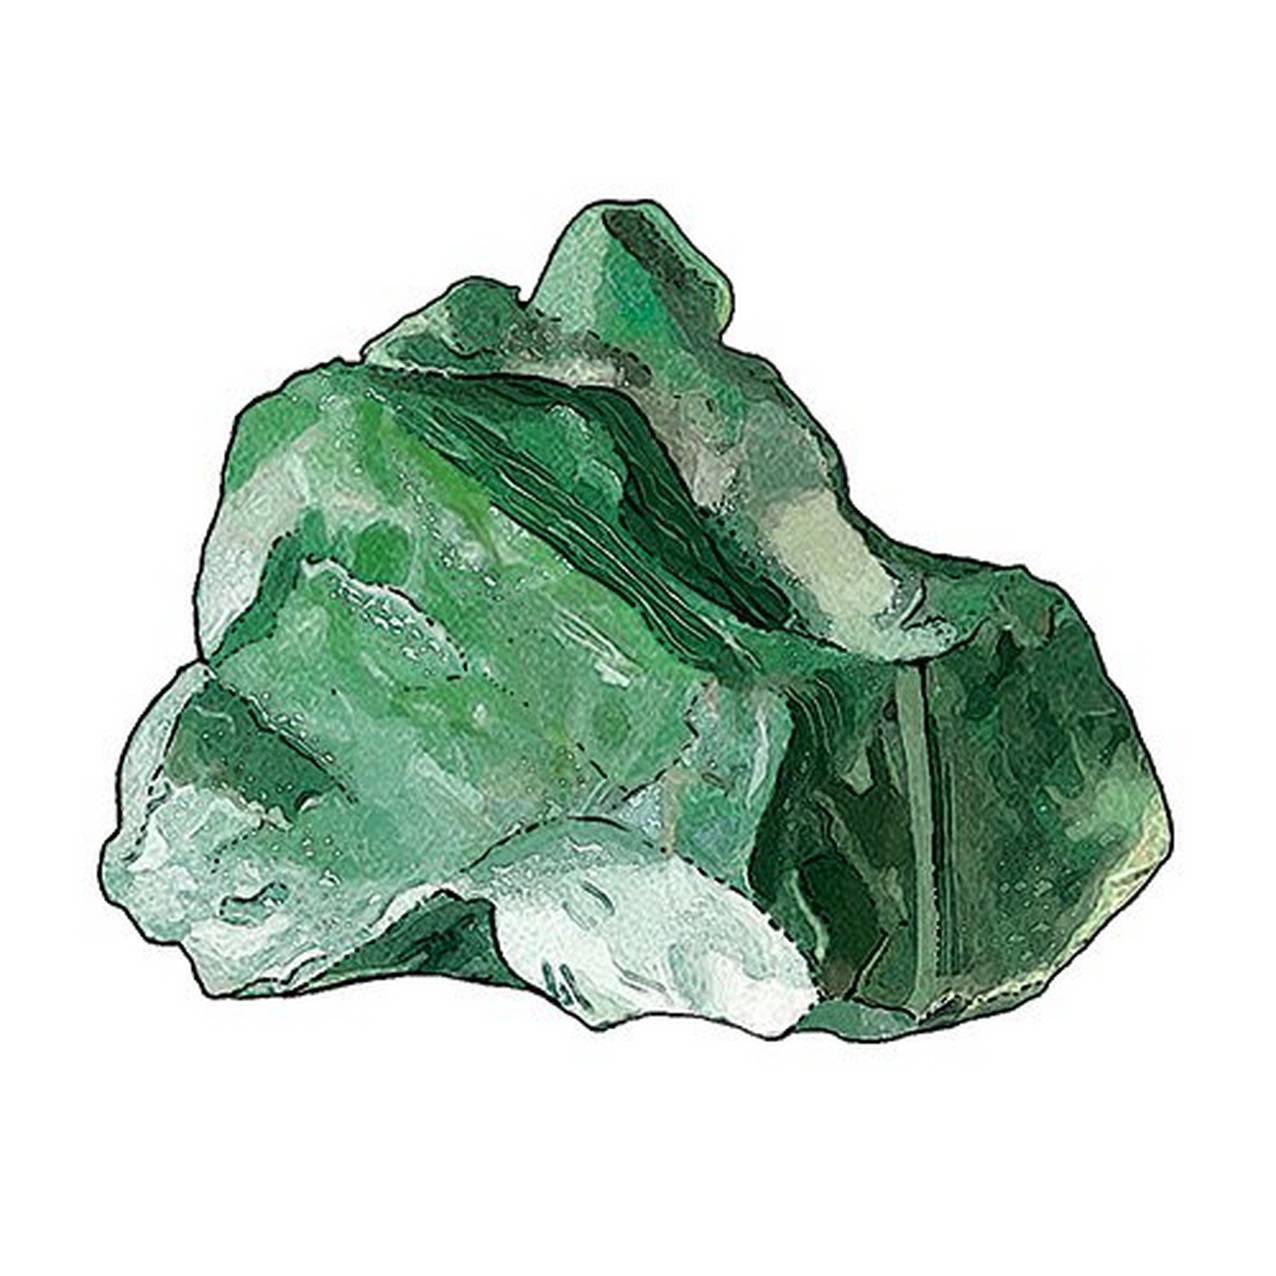 icon of a jade stone